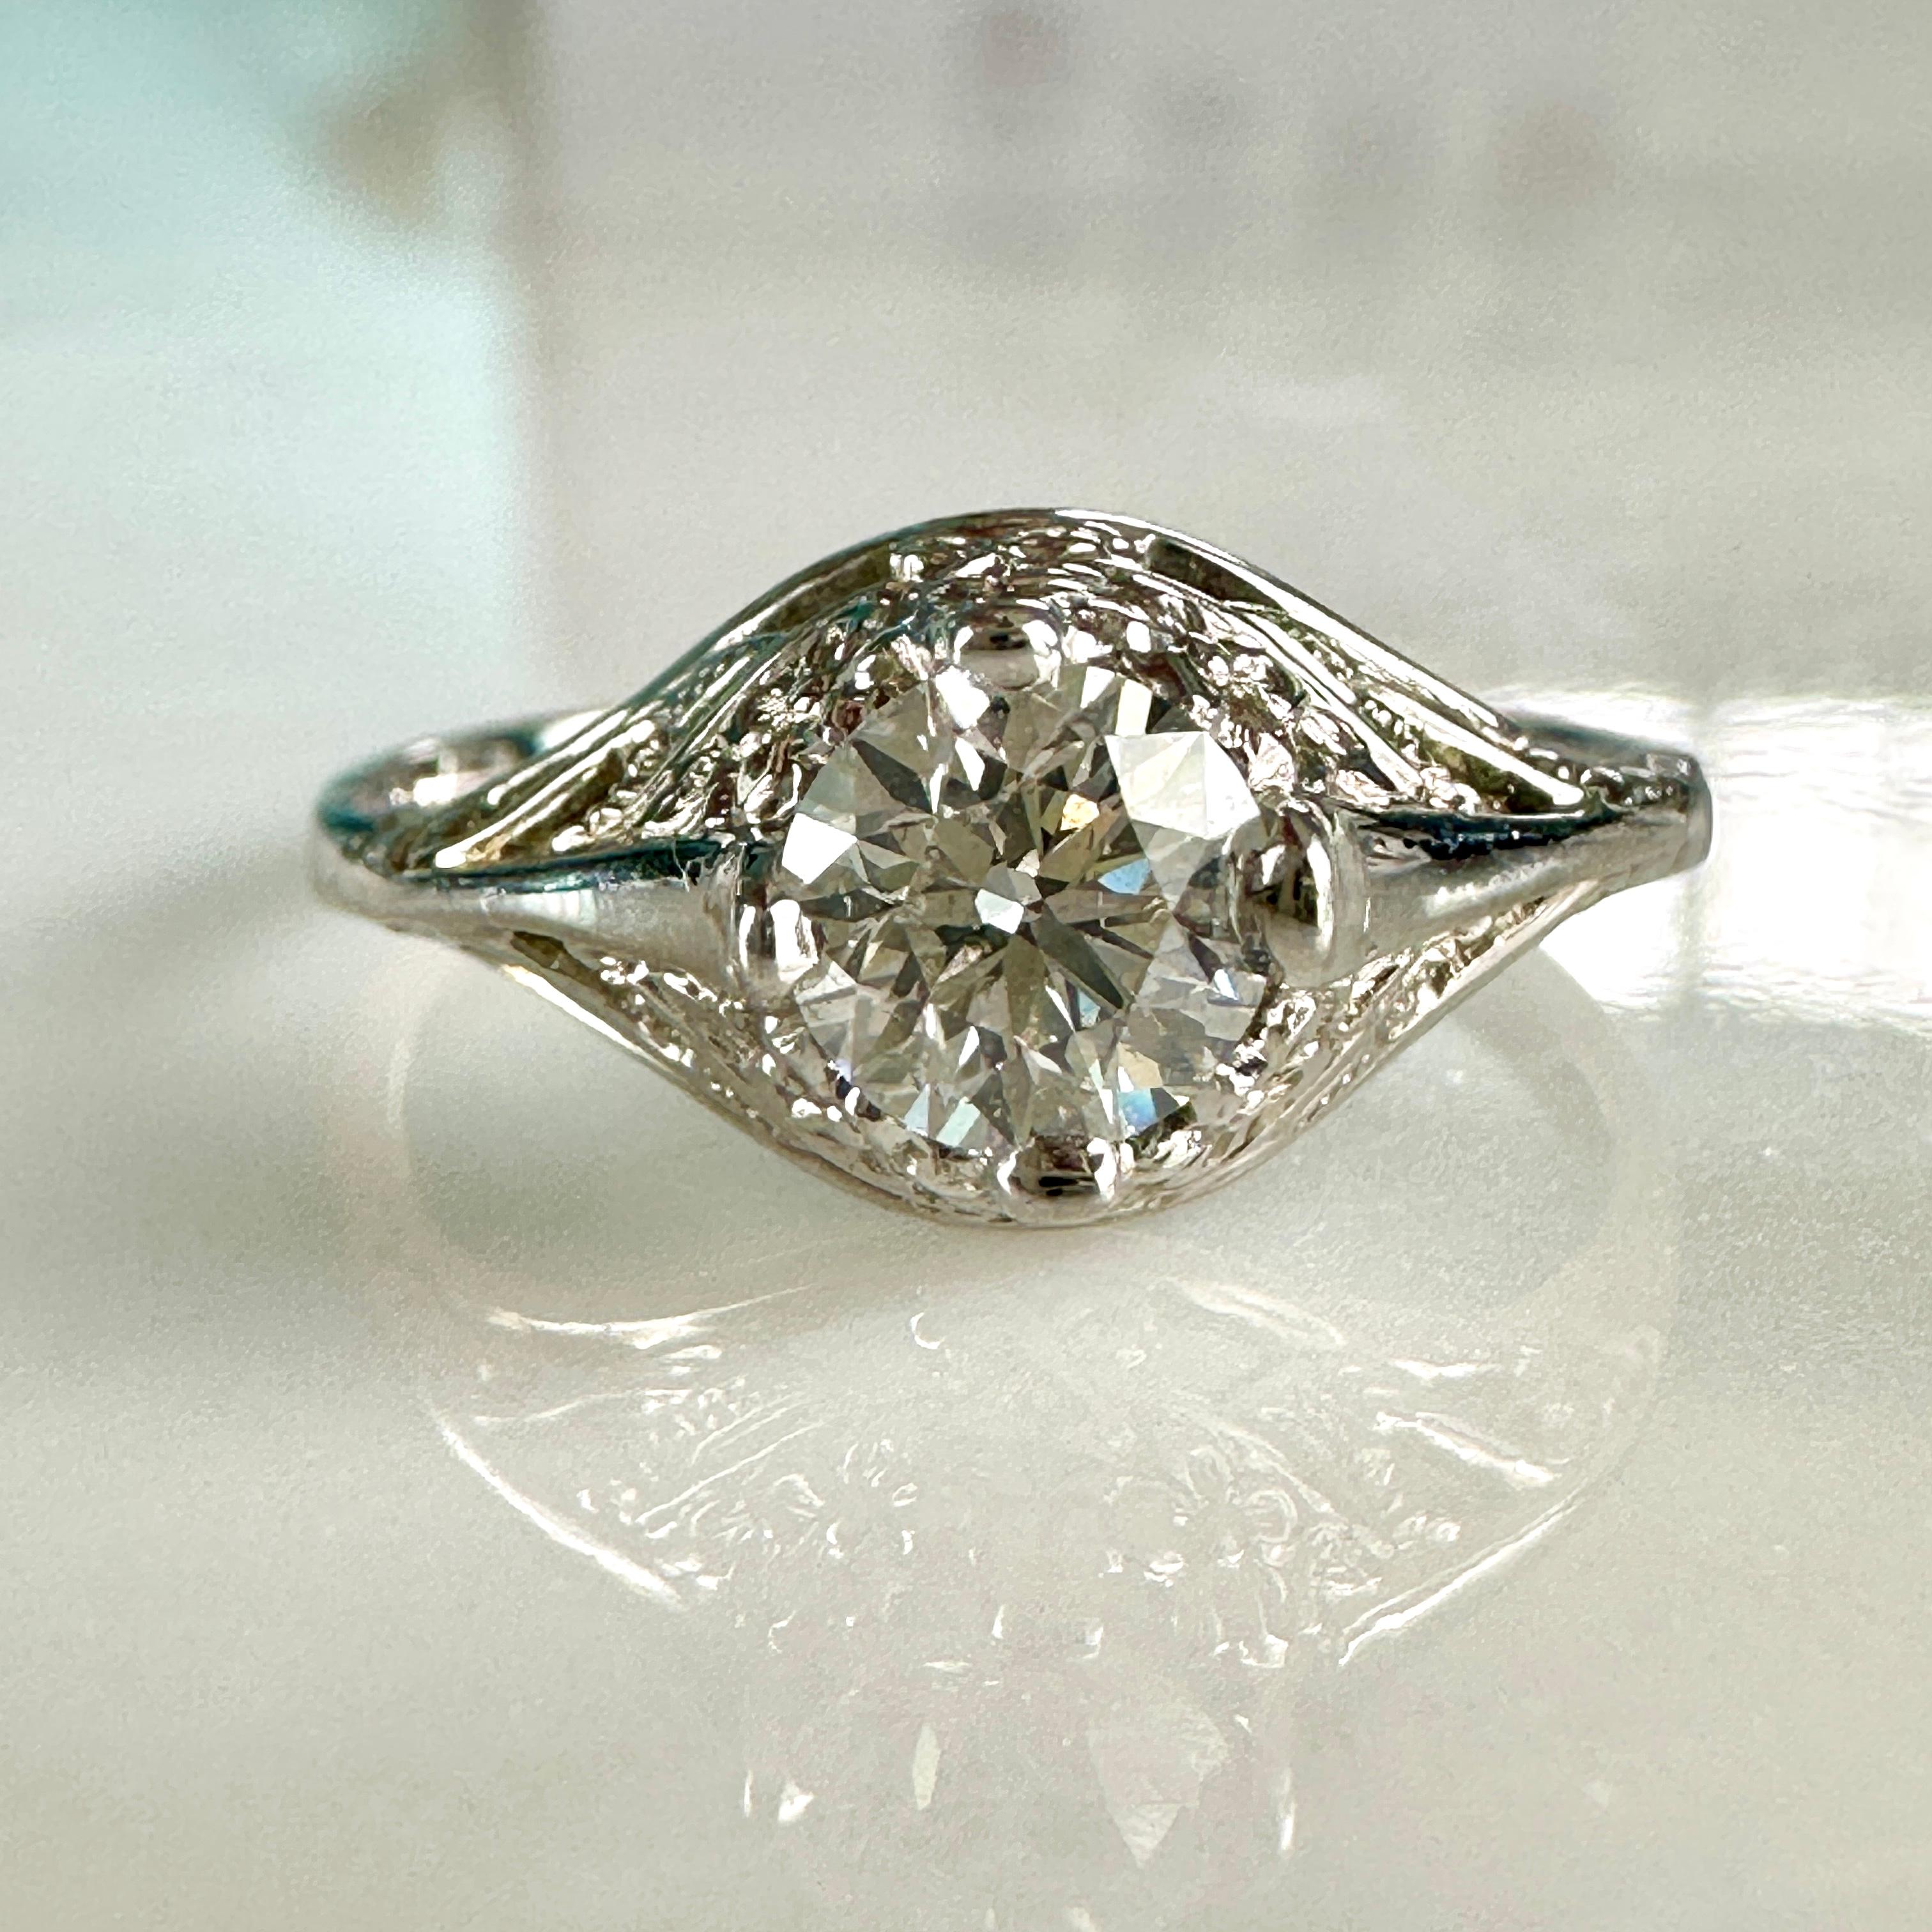 Details:
Pretty 14K white gold filigree  1/2 carat diamond ring from the 1920's! The filigree has beautiful sweet flowers in the 14K gold. The height of the ring sits up 5.6mm, and the diamond measures 5.25mm round. This ring has an appraisal.